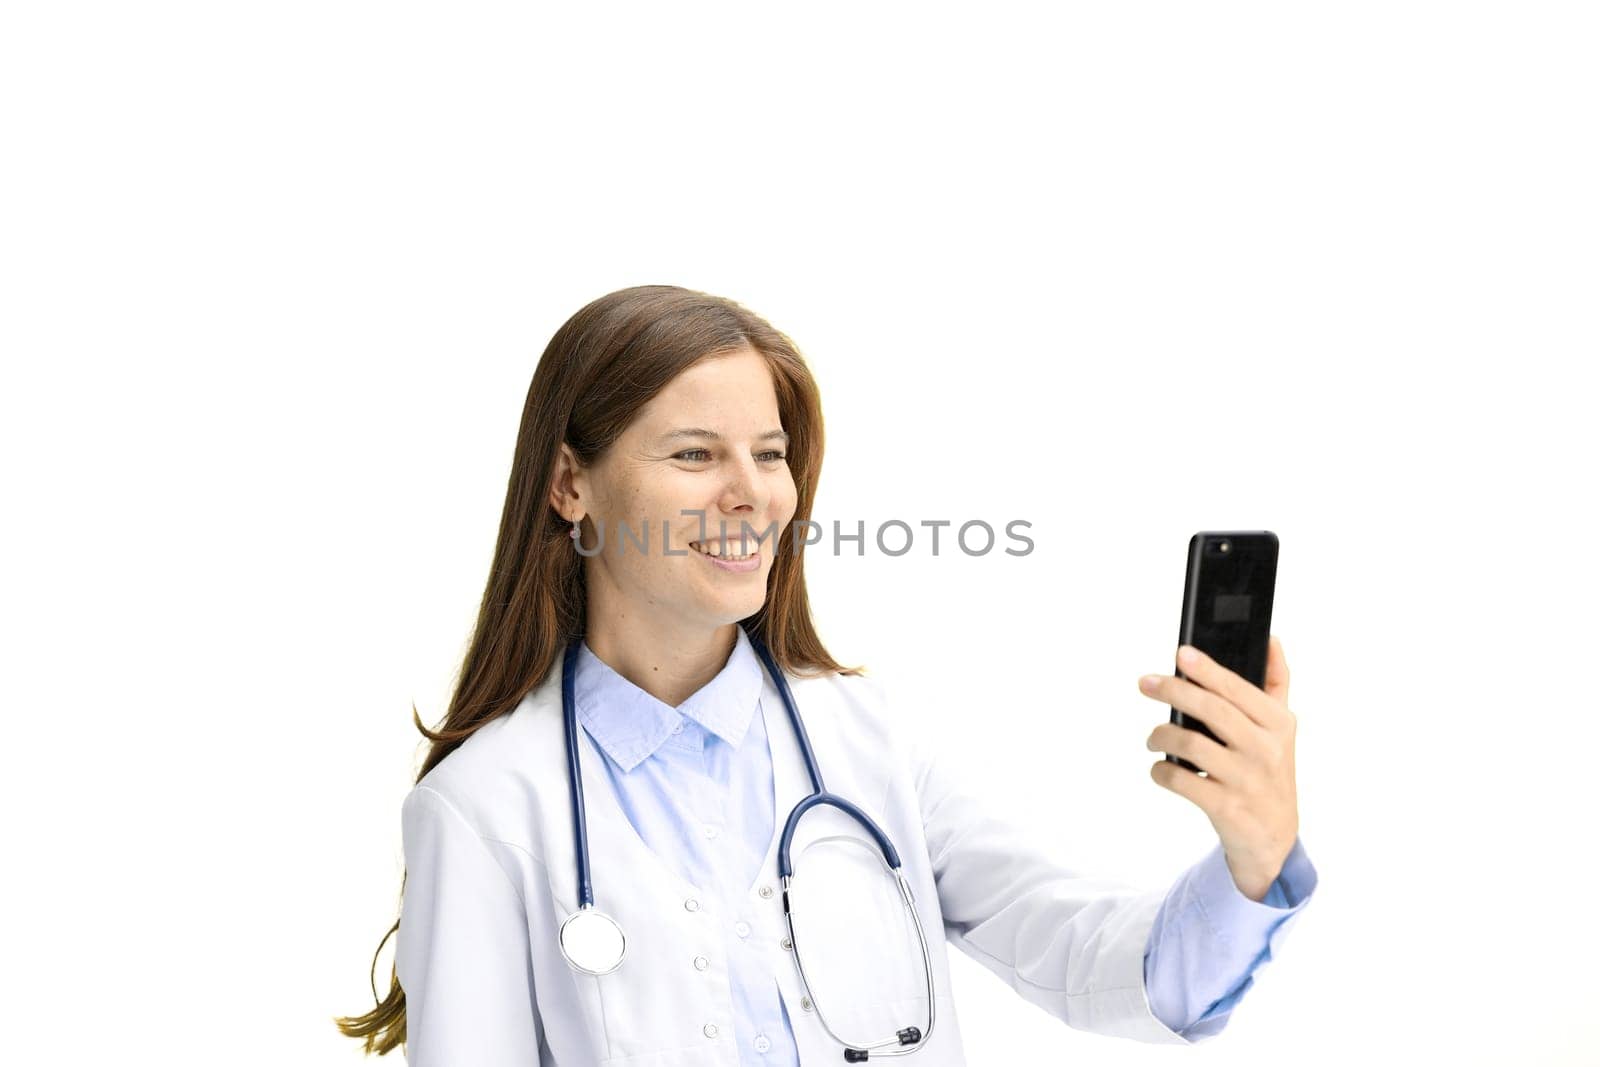 Female doctor, close-up, on a white background, with a phone.